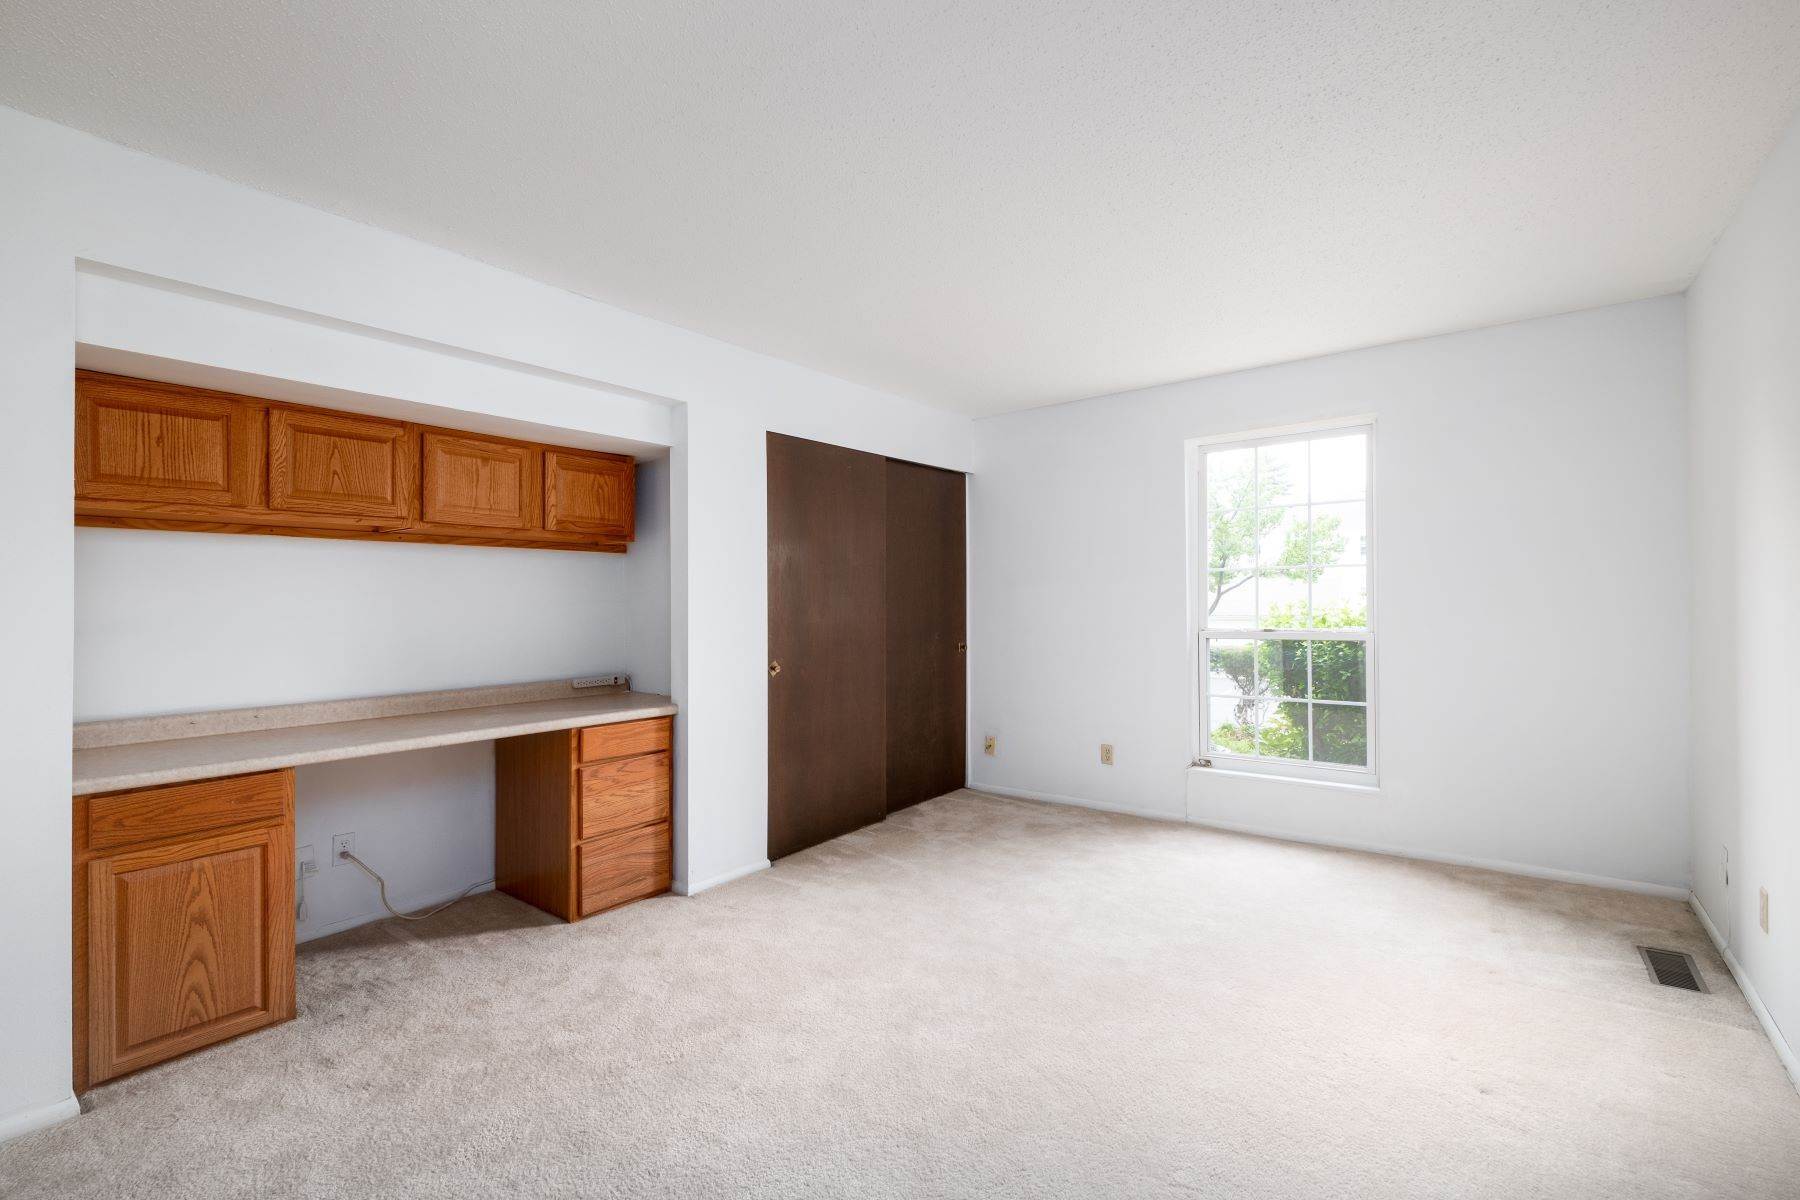 10. Condominiums for Sale at Location, Location 2bed/2 bath condo in Manors of Oxford Hill 10381 Oxford Hill Drive #5 St. Louis, Missouri 63146 United States